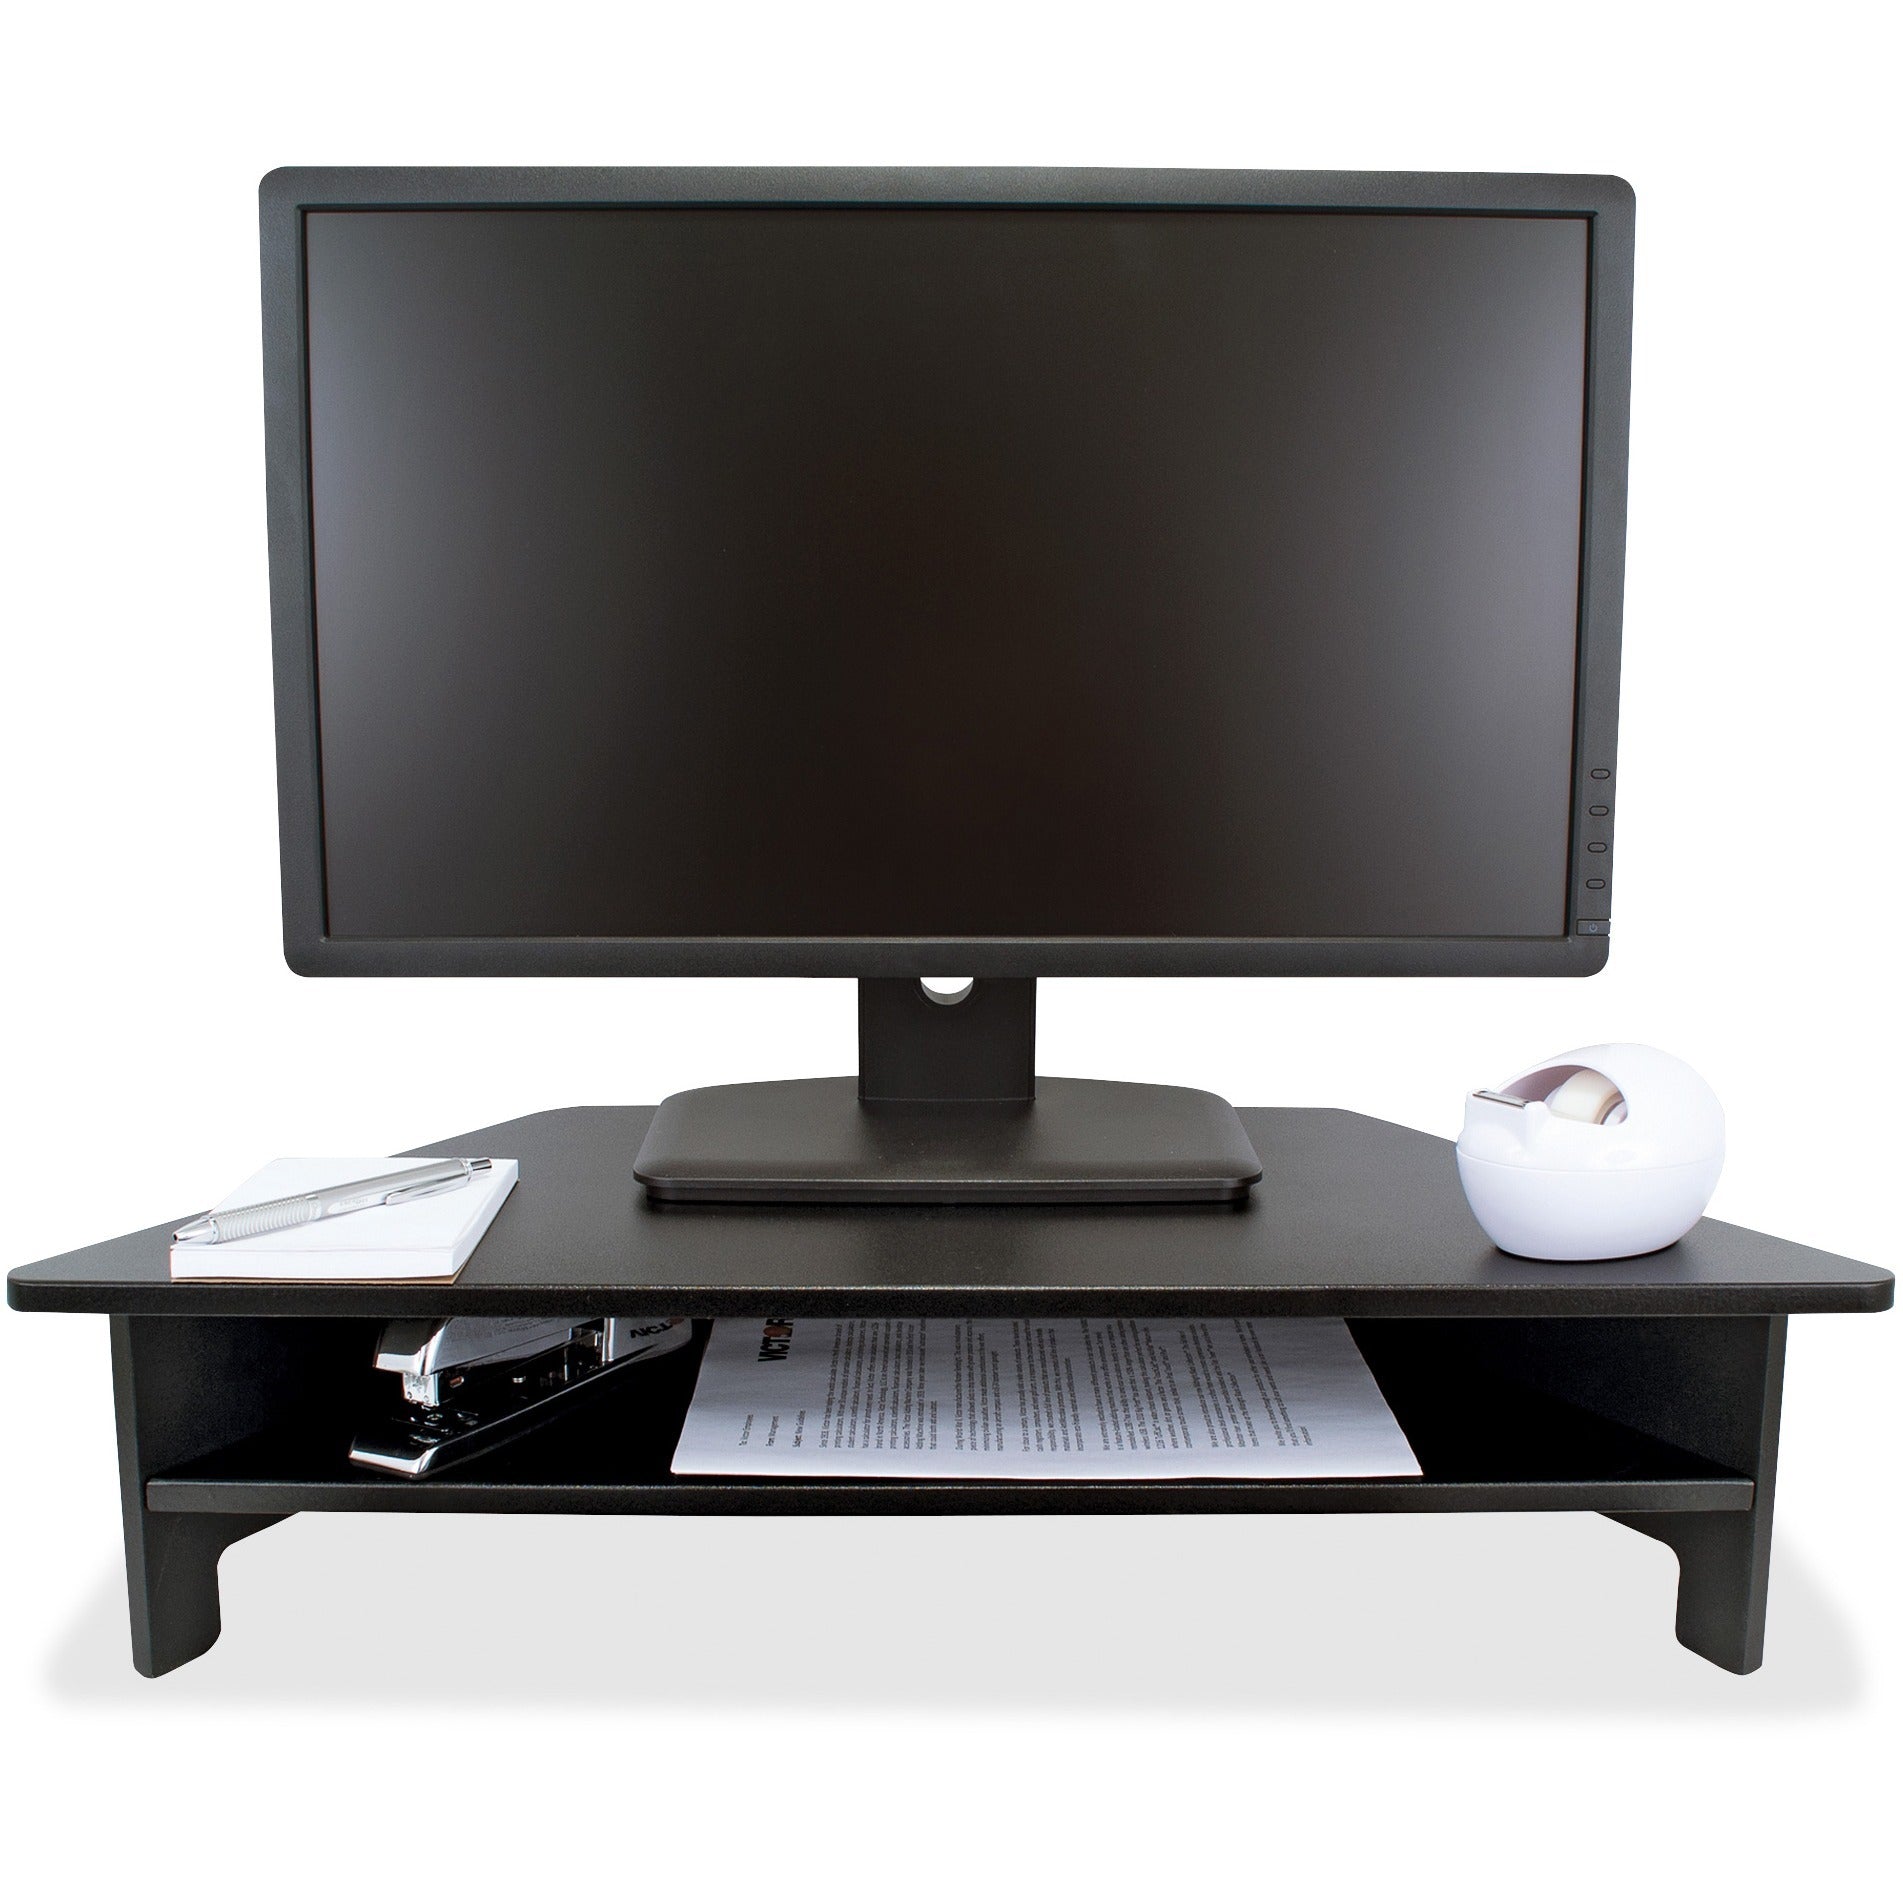 Victor High Rise Monitor Stand - Monitor Stand - Desk Riser - 7.5" Height x 27" Width x 11.5" Depth - Wood - Black - 